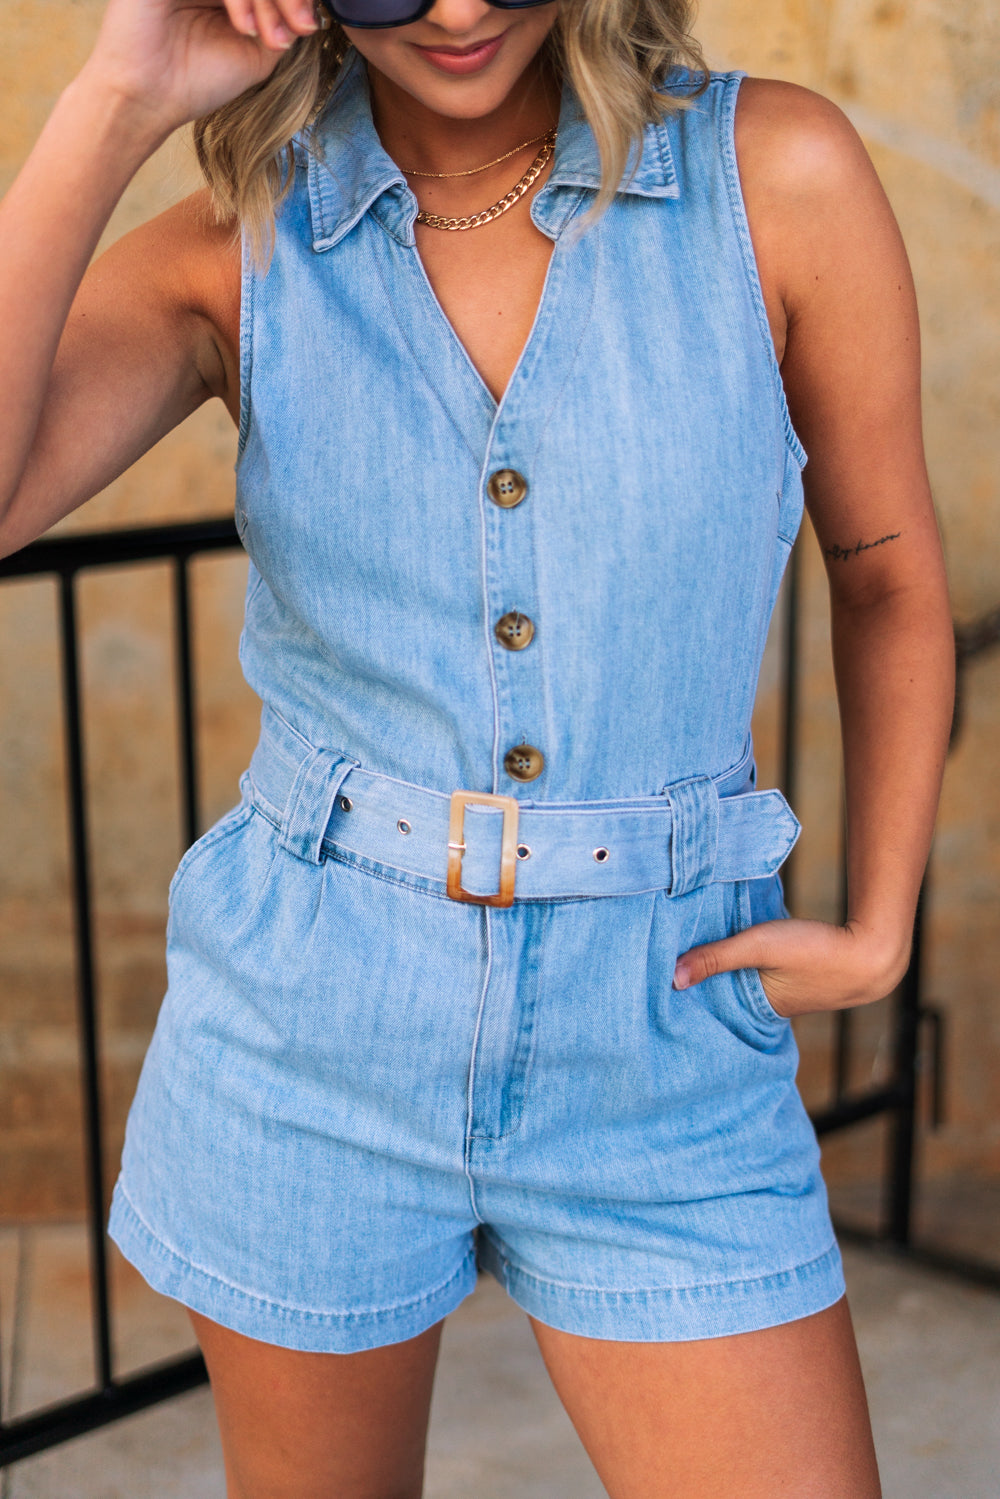 Close front view of female model wearing the Georgia Belted Denim Romper in light wash, that has a button up front, collar, and belted waist.